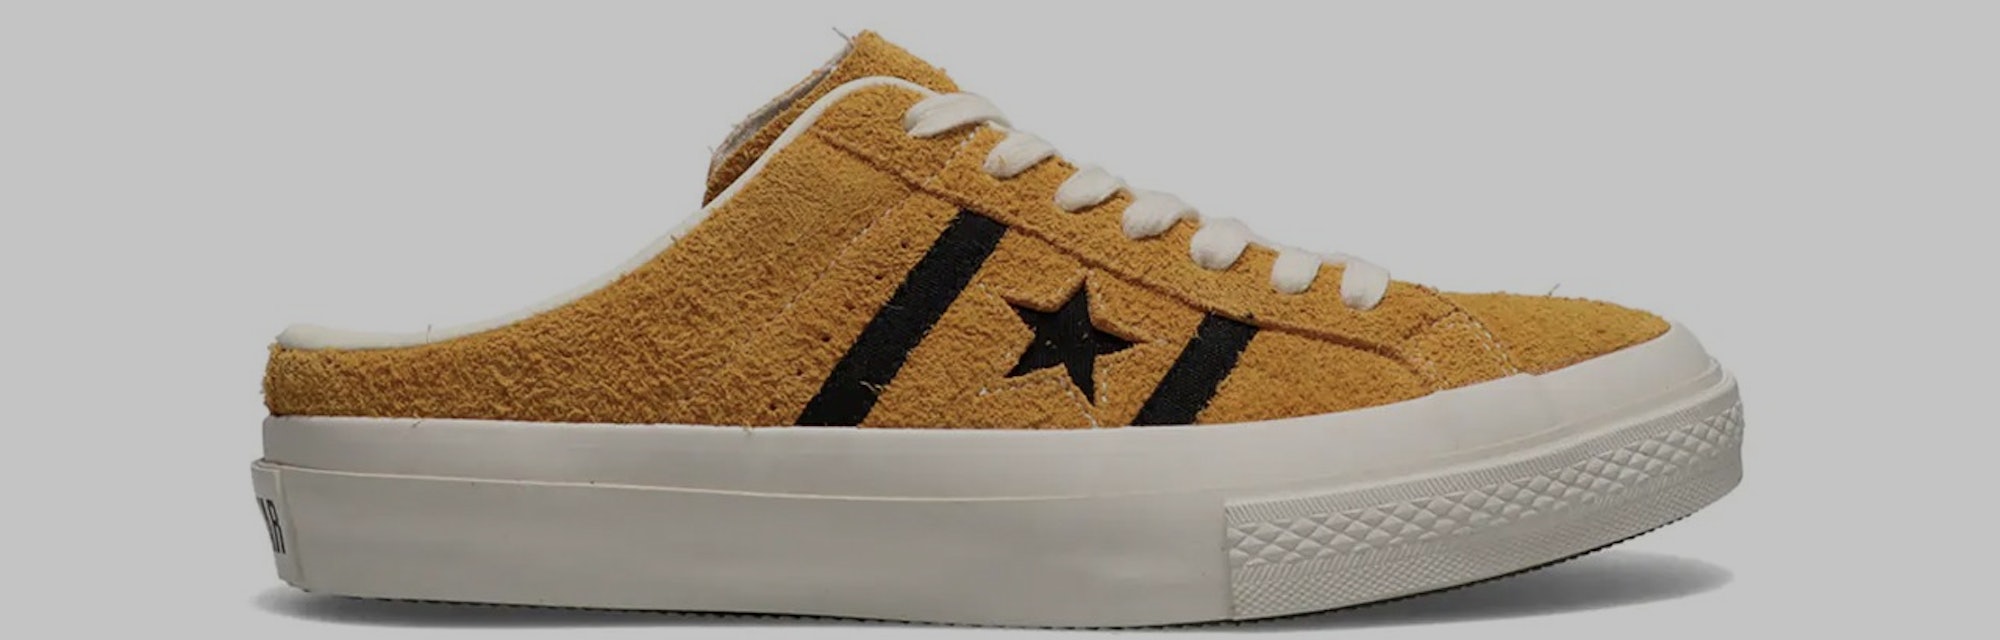 Converse Stars and Bars Mule